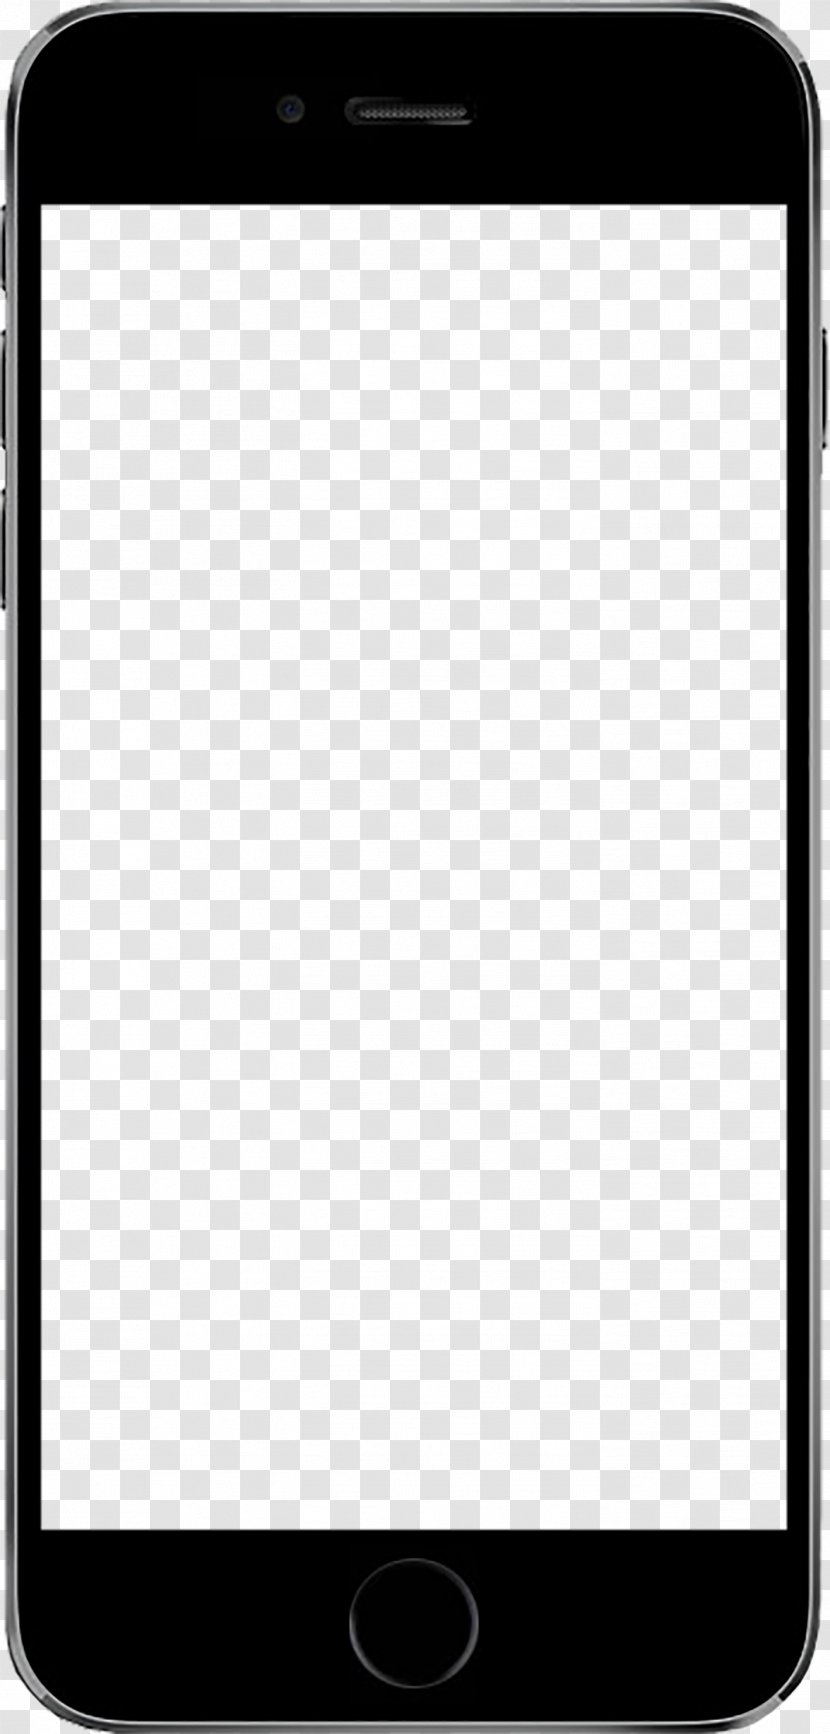 IPhone X 8 Feature Phone Smartphone - Iphone - Iphone,6 Transparent PNG